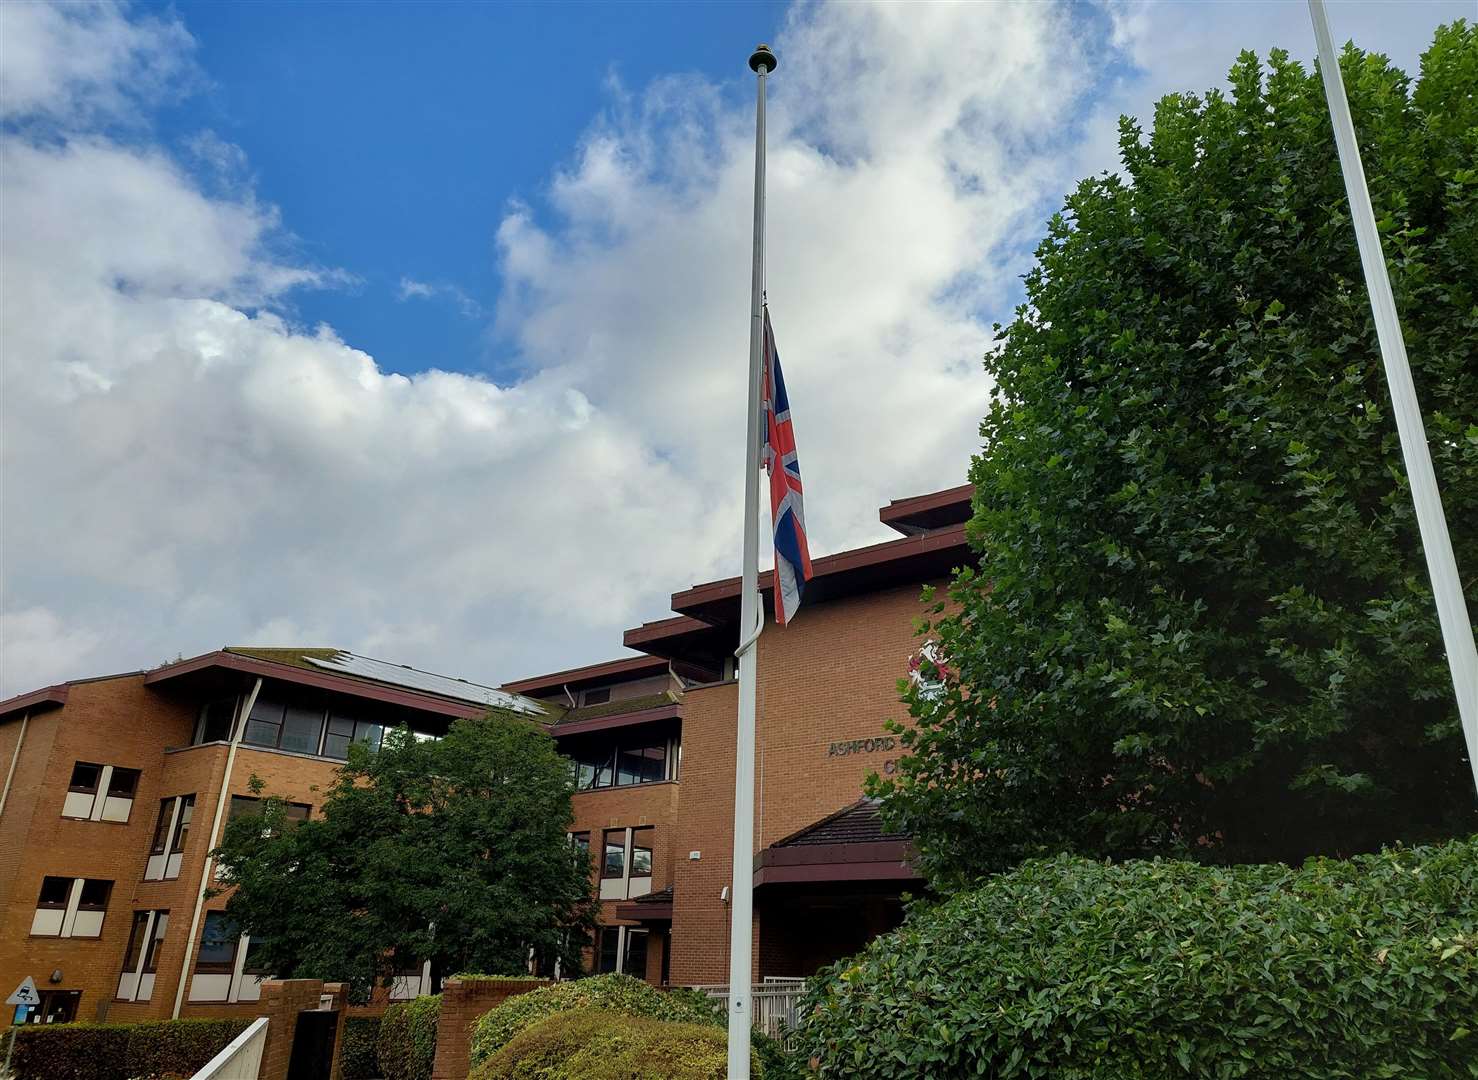 The Union Flag is being flown at half-mast as a mark of respect outside Ashford Borough Council's base